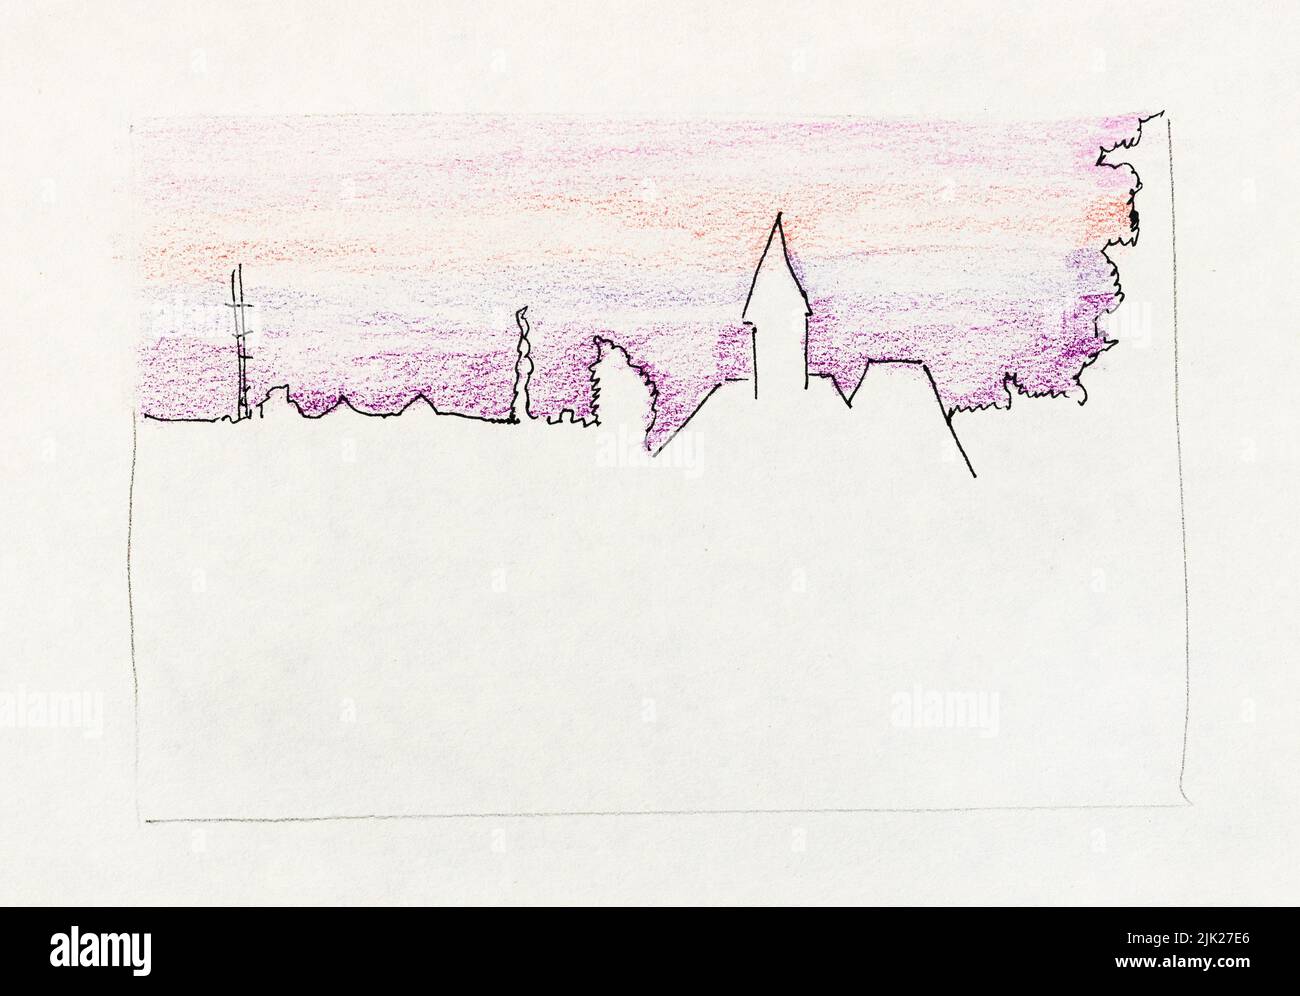 outline sketch of Gatchina town skyline Russia with Priory Palace under purple sunset sky in hand-drawn with black pen and color pencils on old white Stock Photo